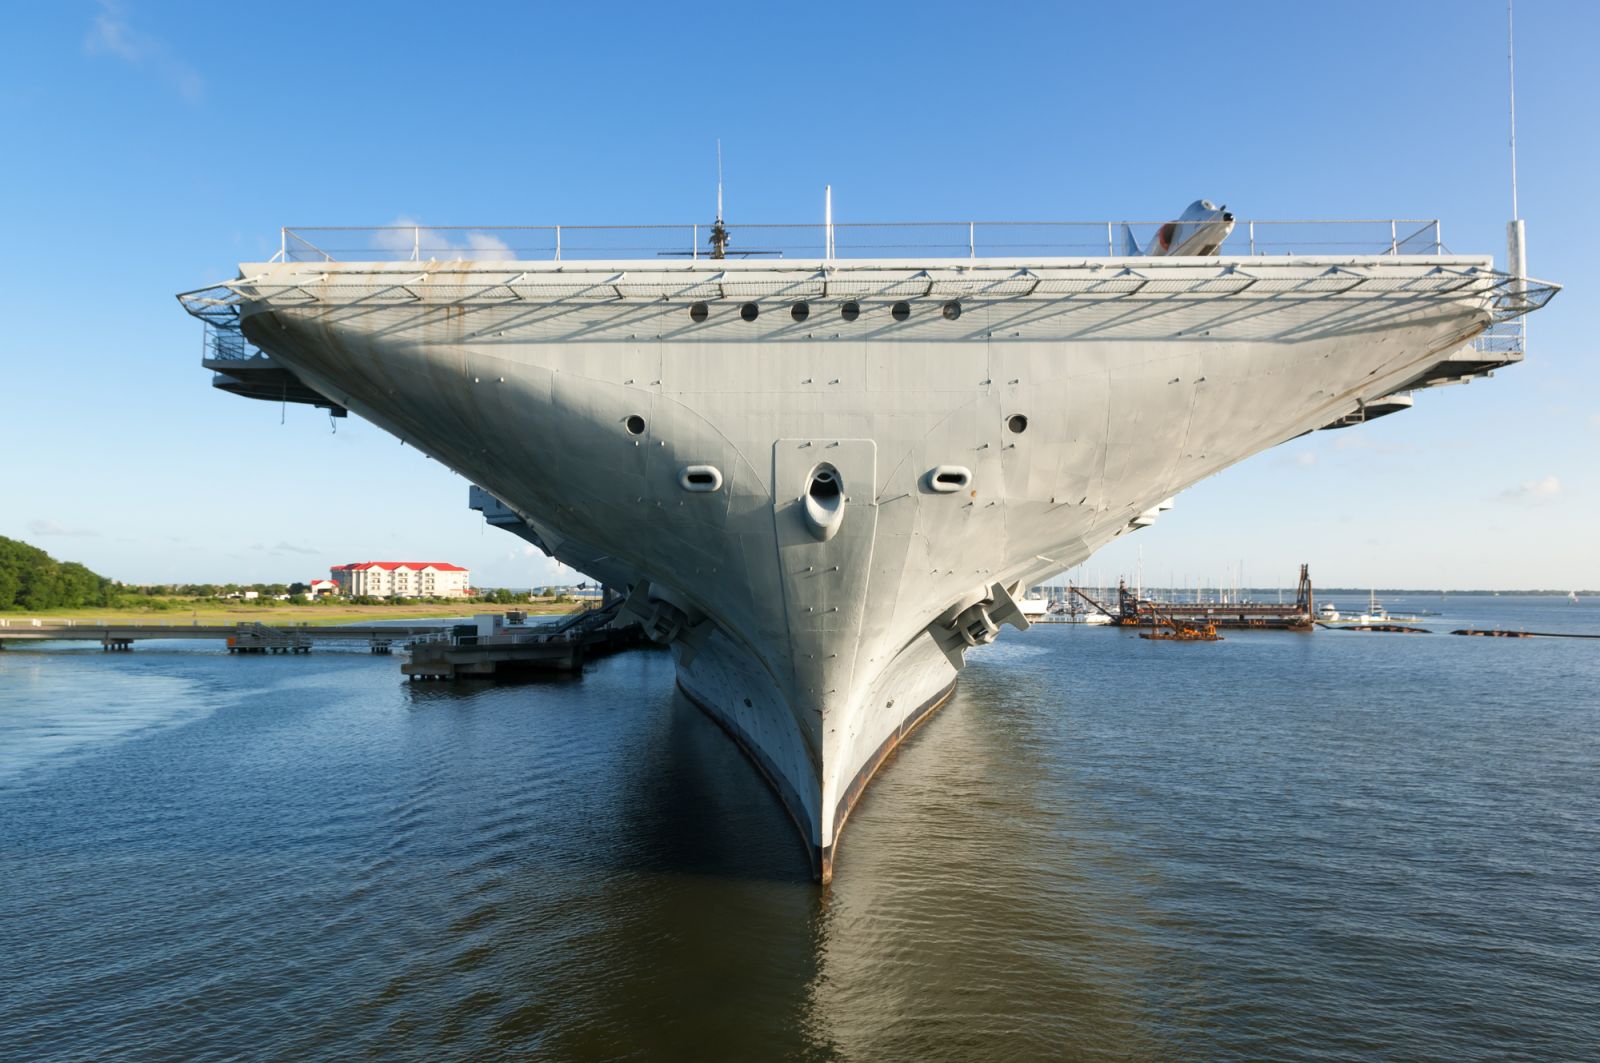 The aircraft carrier Yorktown is one of the signature features of Patriots Point Naval & Maritime Museum. (Photo/file)